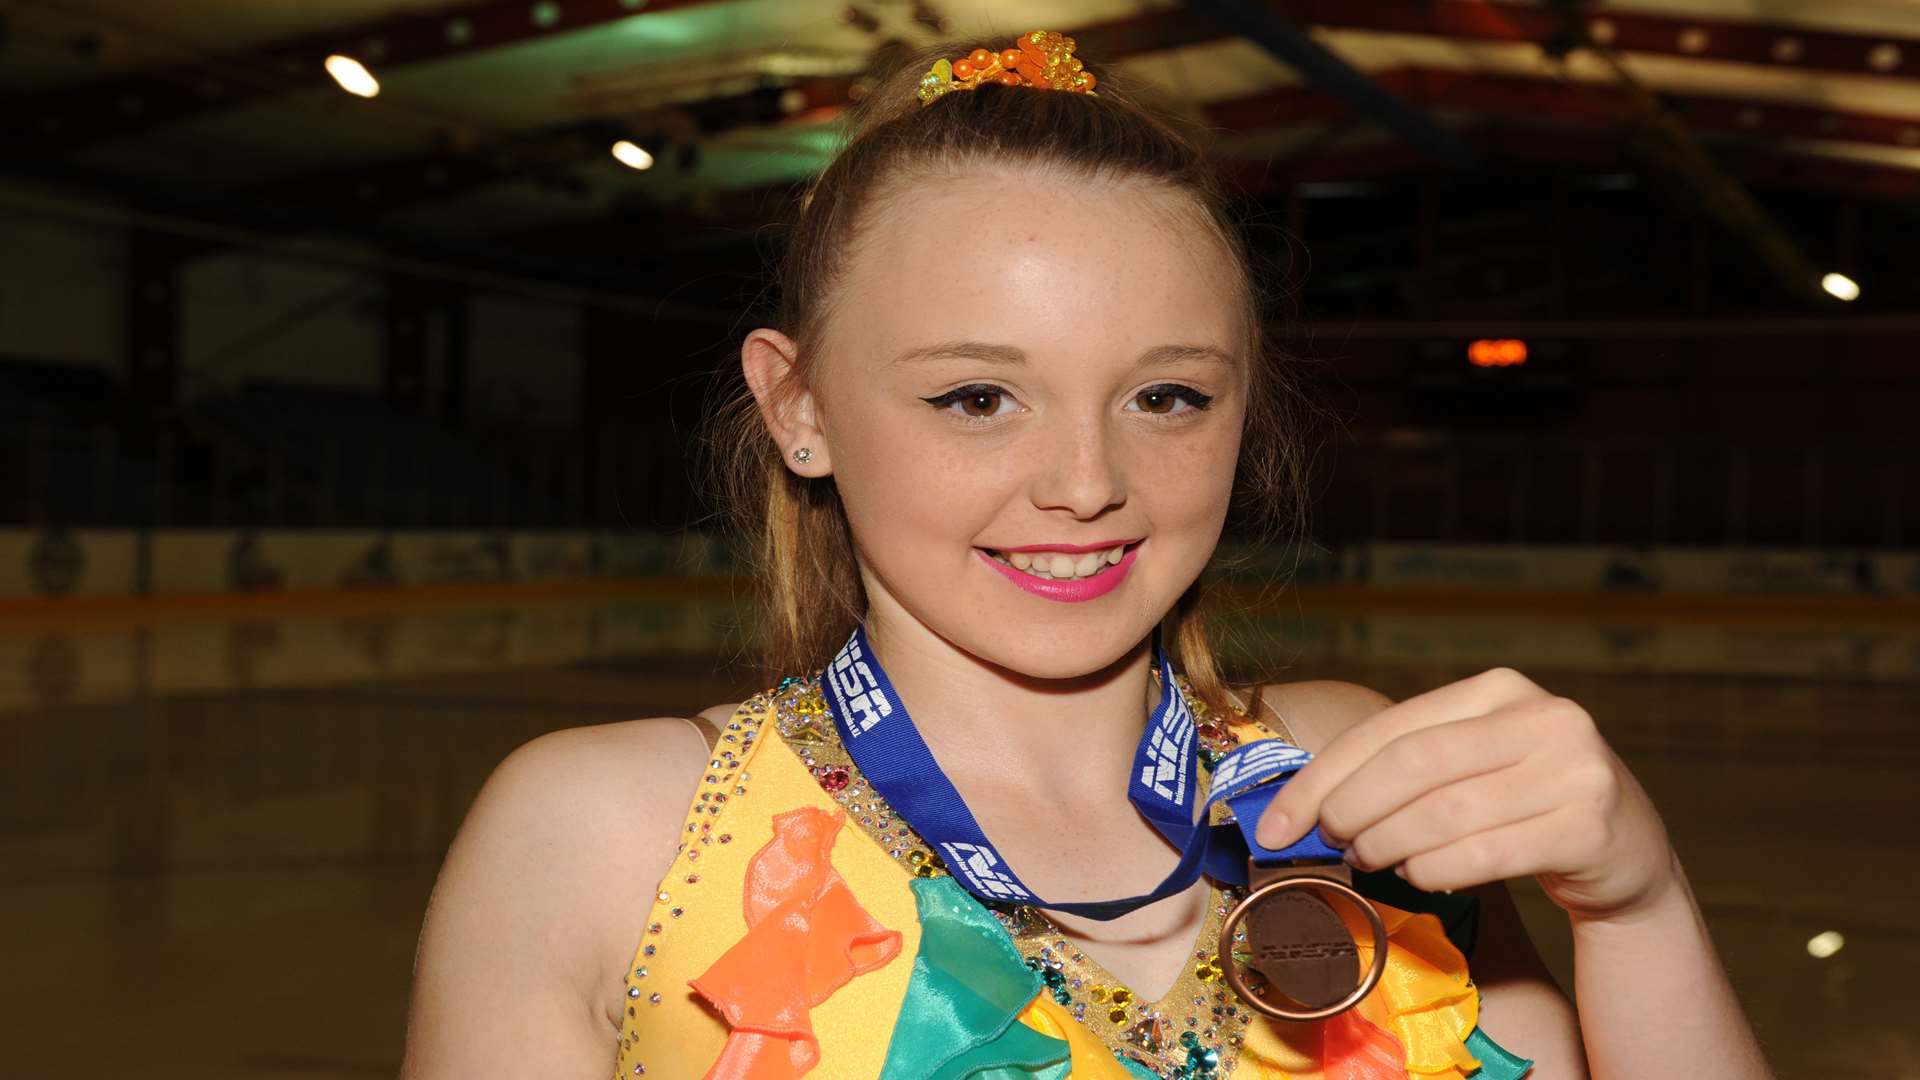 The 14-year-old won bronze at the Solo British Ice Dance Championships.